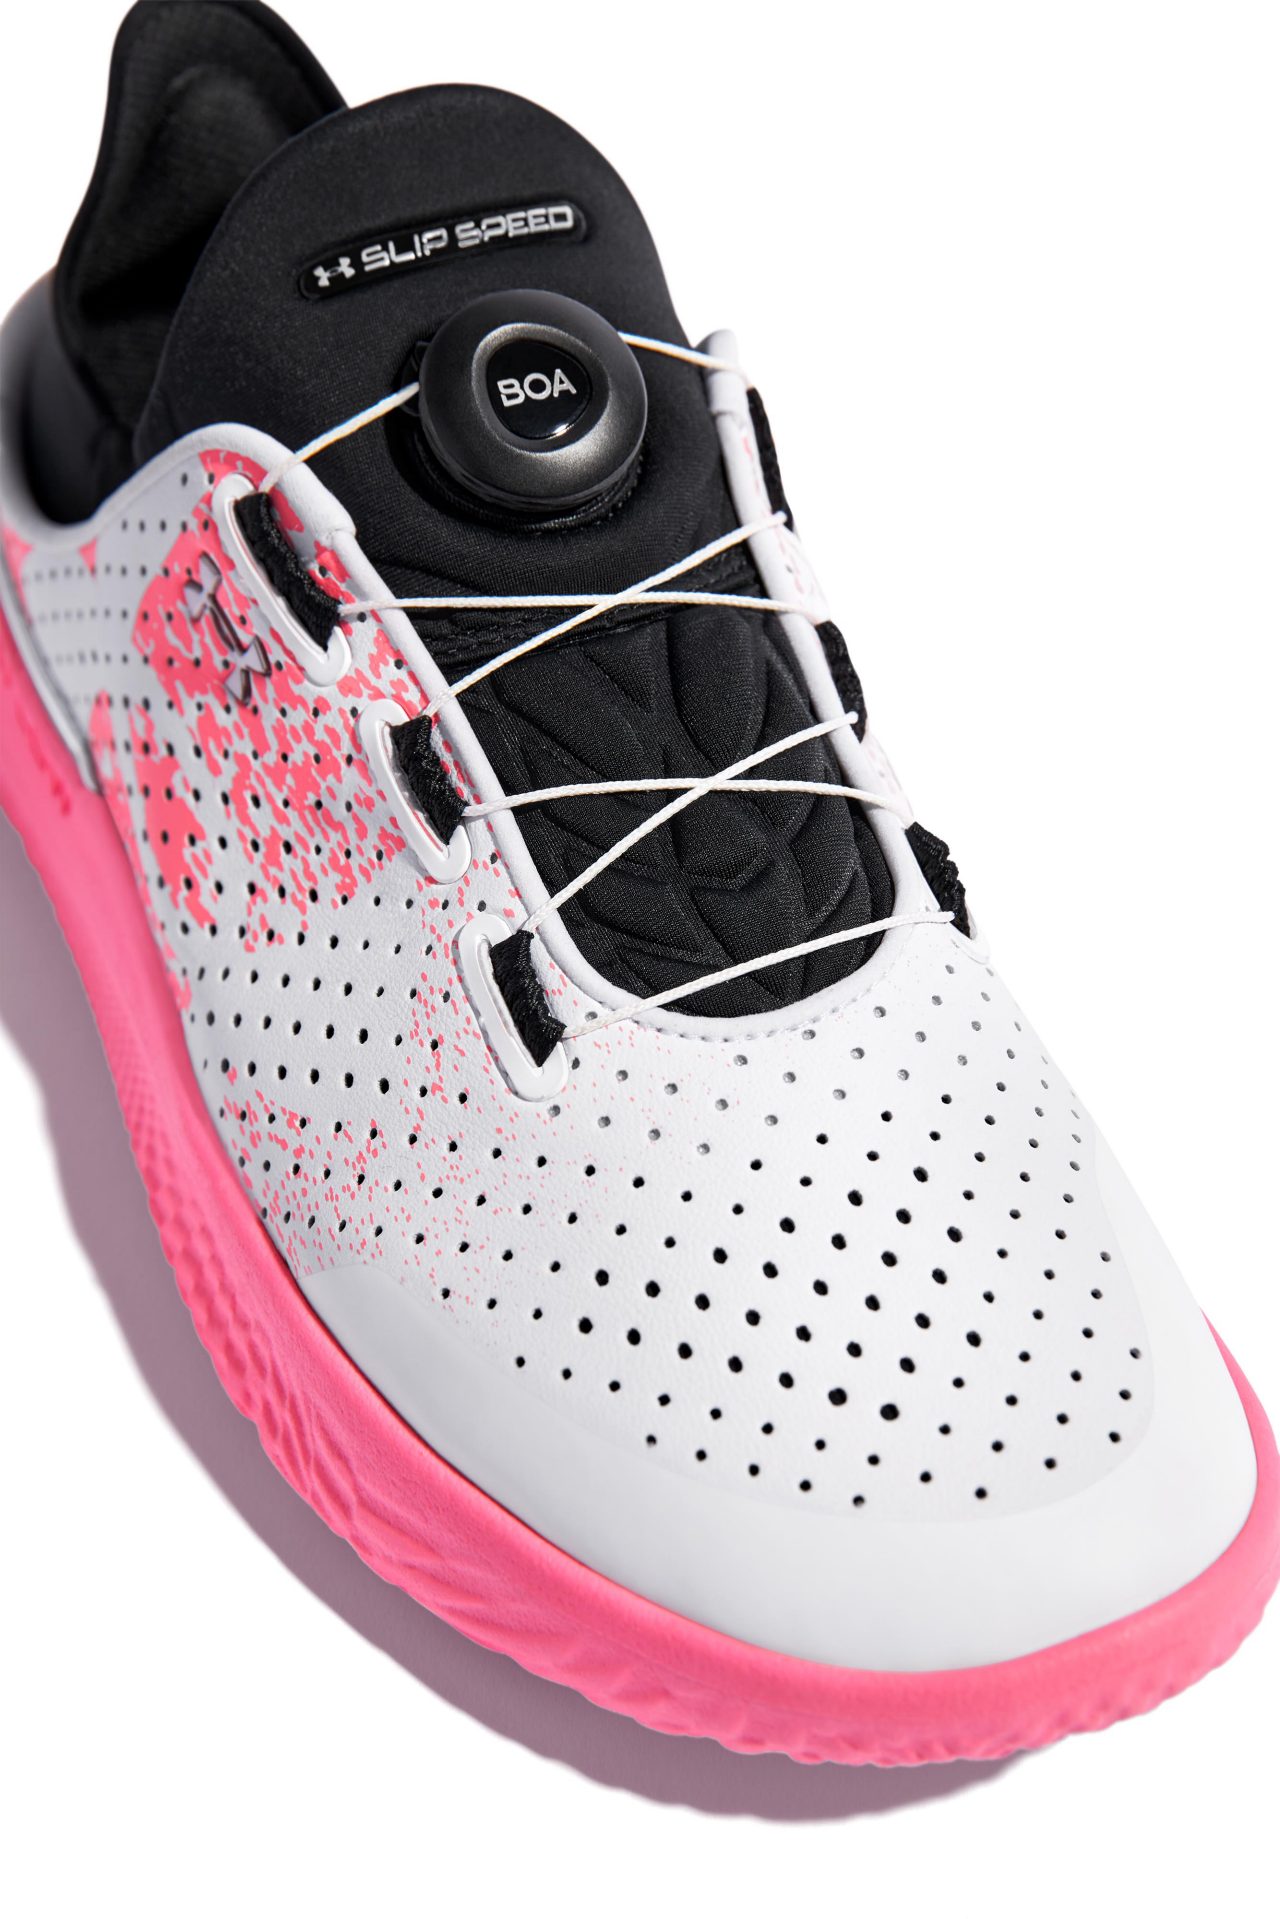 Introducing UA SlipSpeed, Under Armour's Most Versatile Training Shoe for Athletes